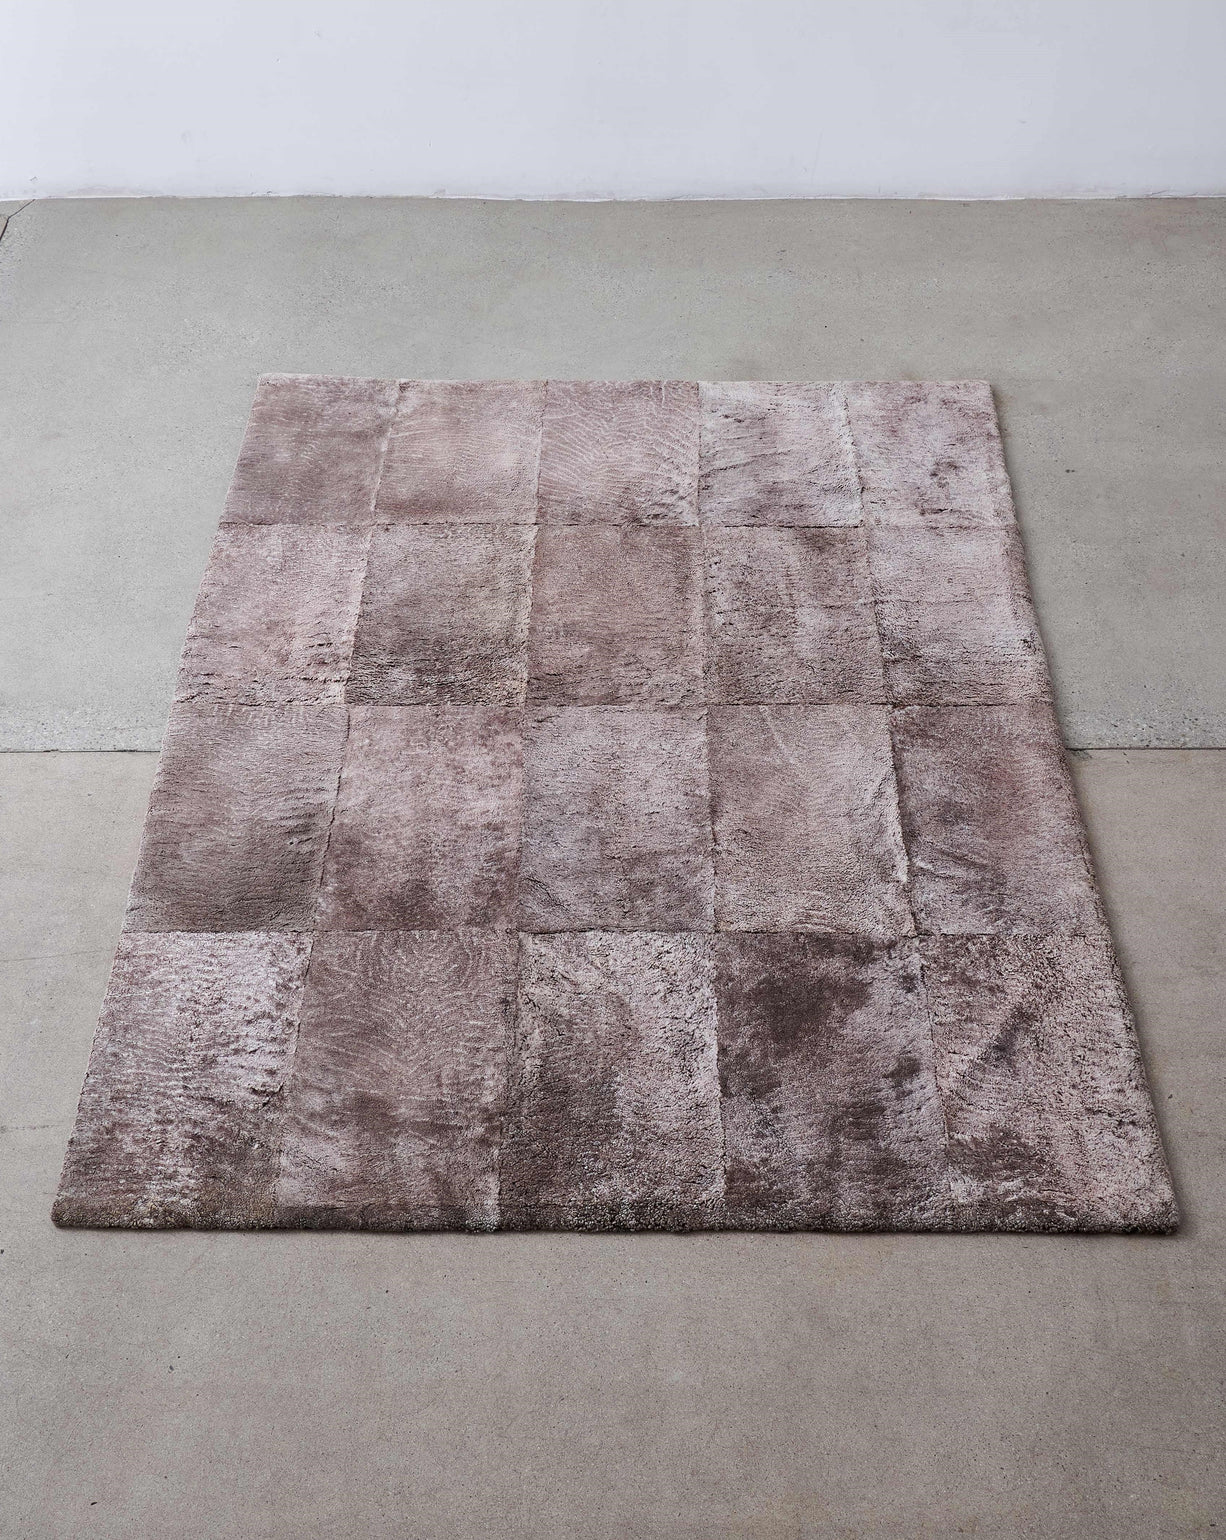 Chesterfield Shearling Rug in Snowy Plum w/straight edge (1 of 1)